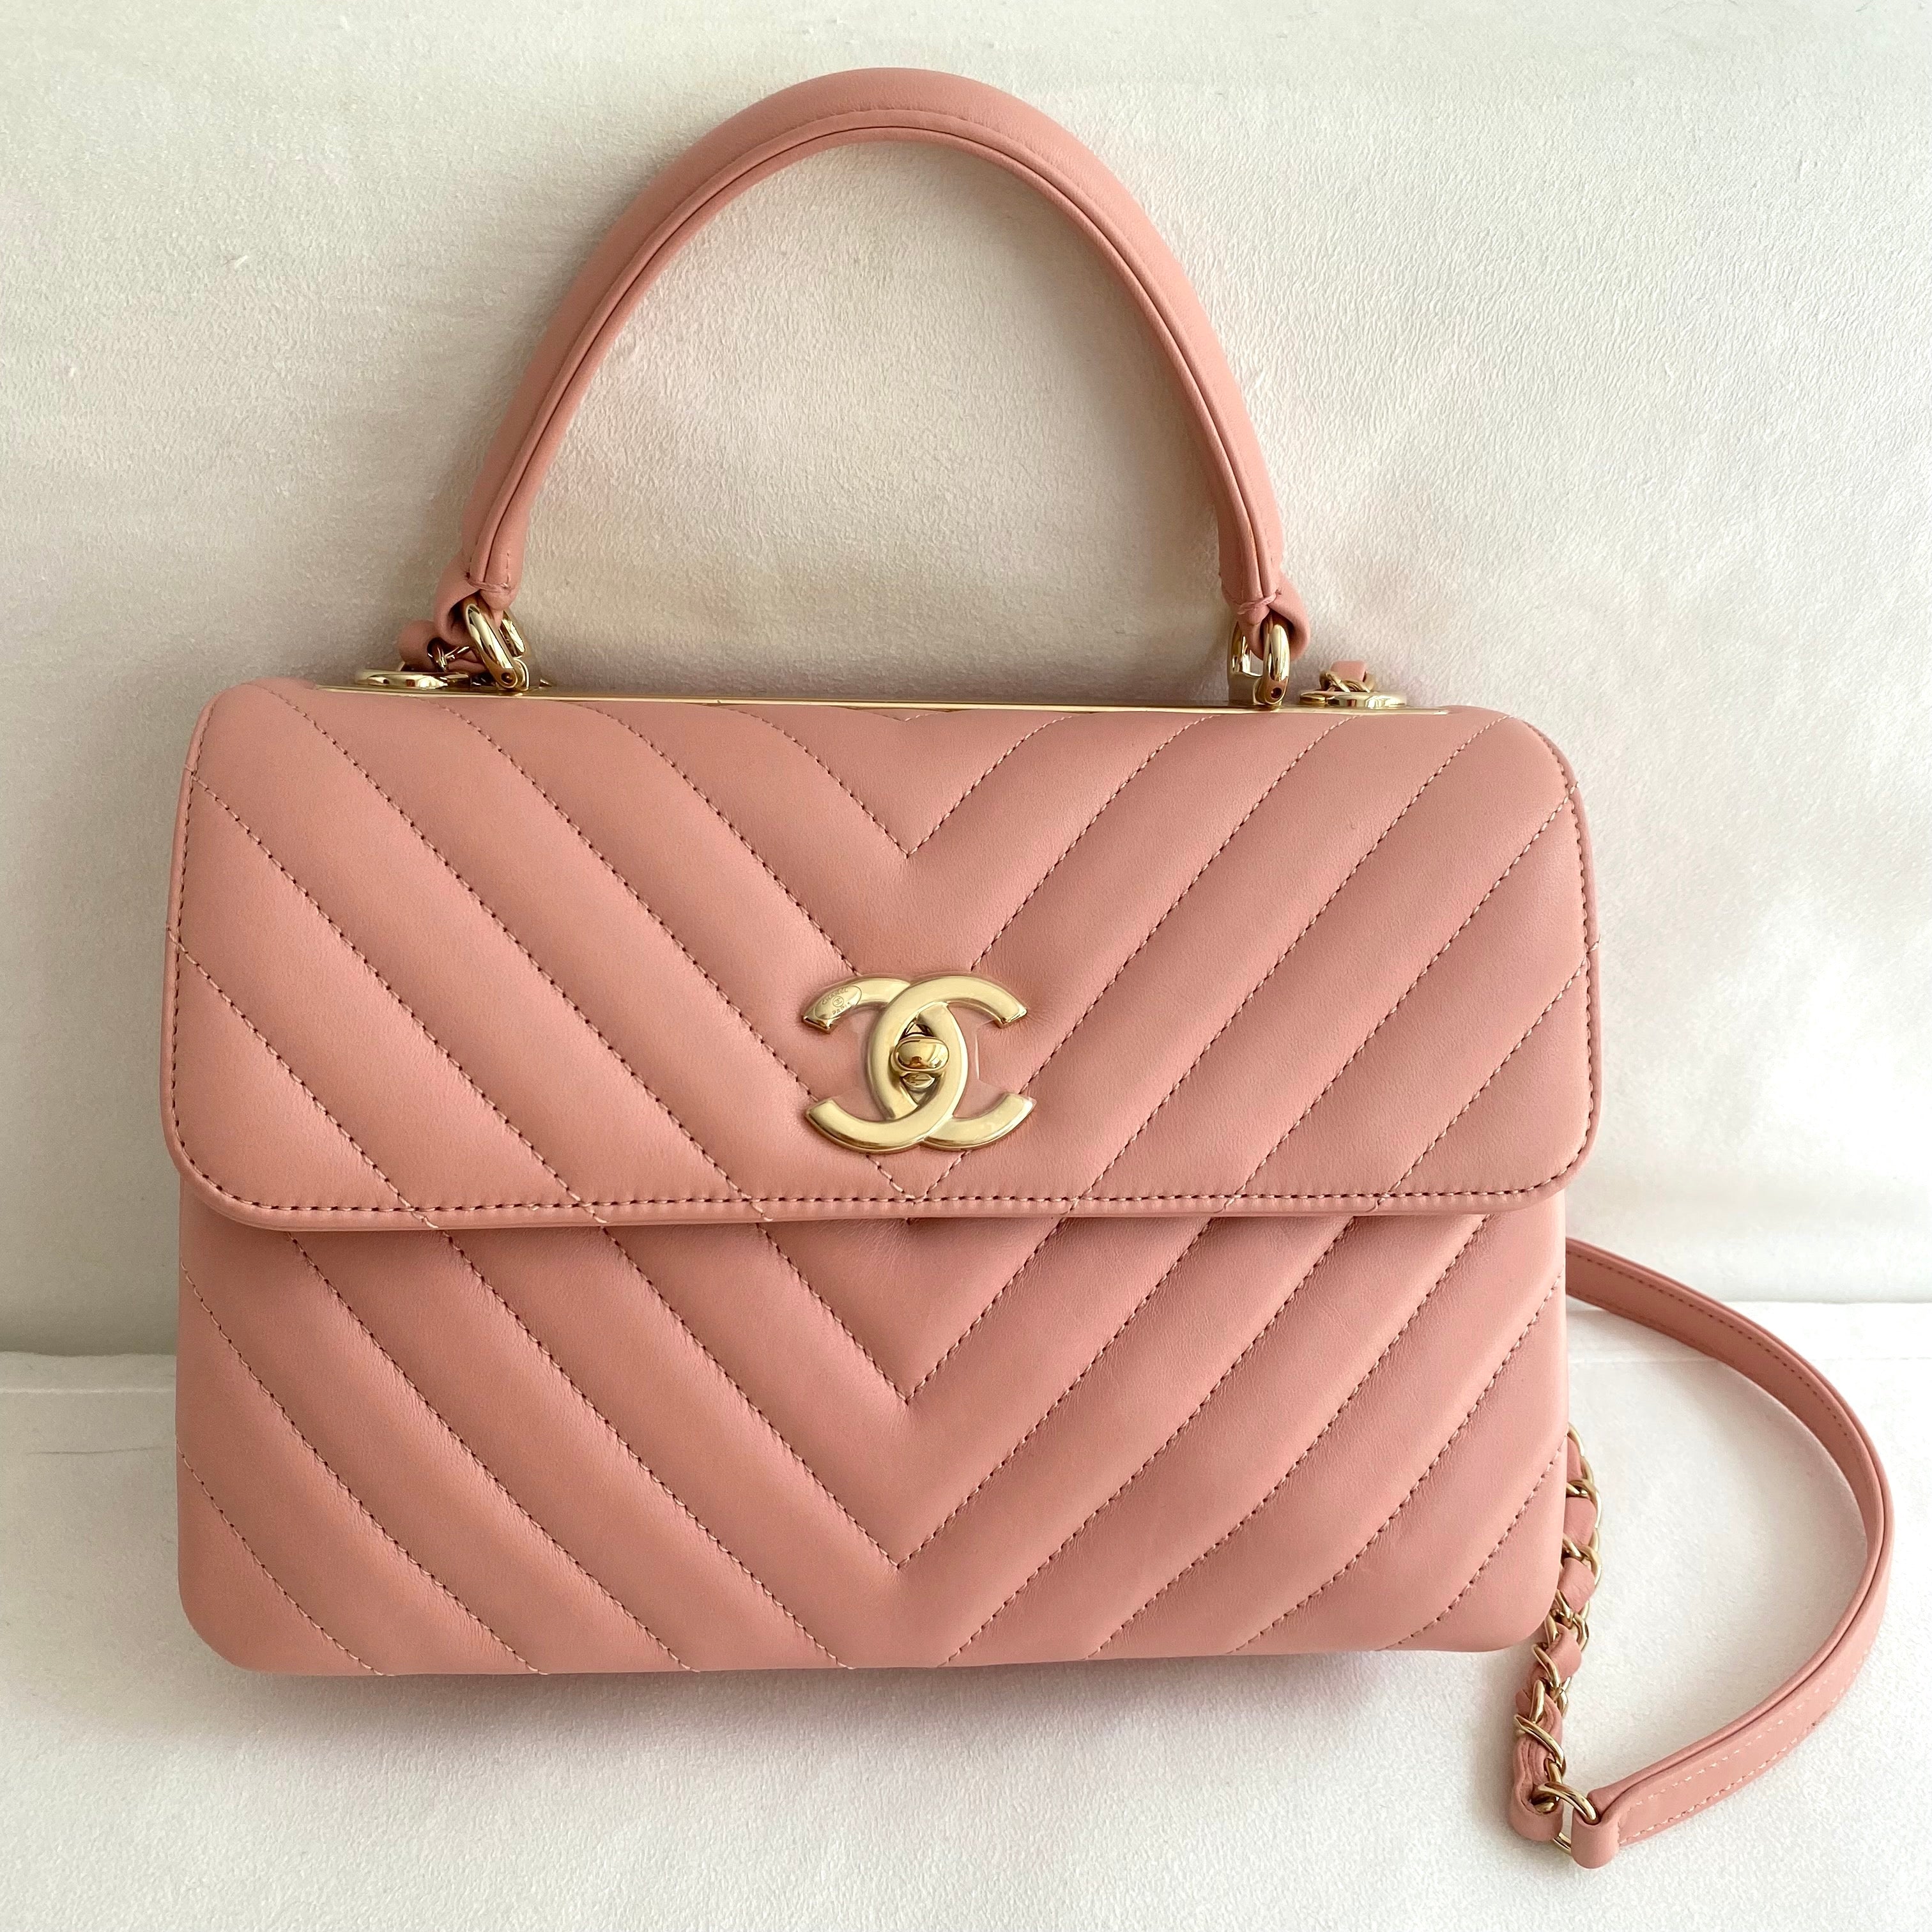 Small Trendy CC Flap Bag with Top Handle in Pink Lambskin